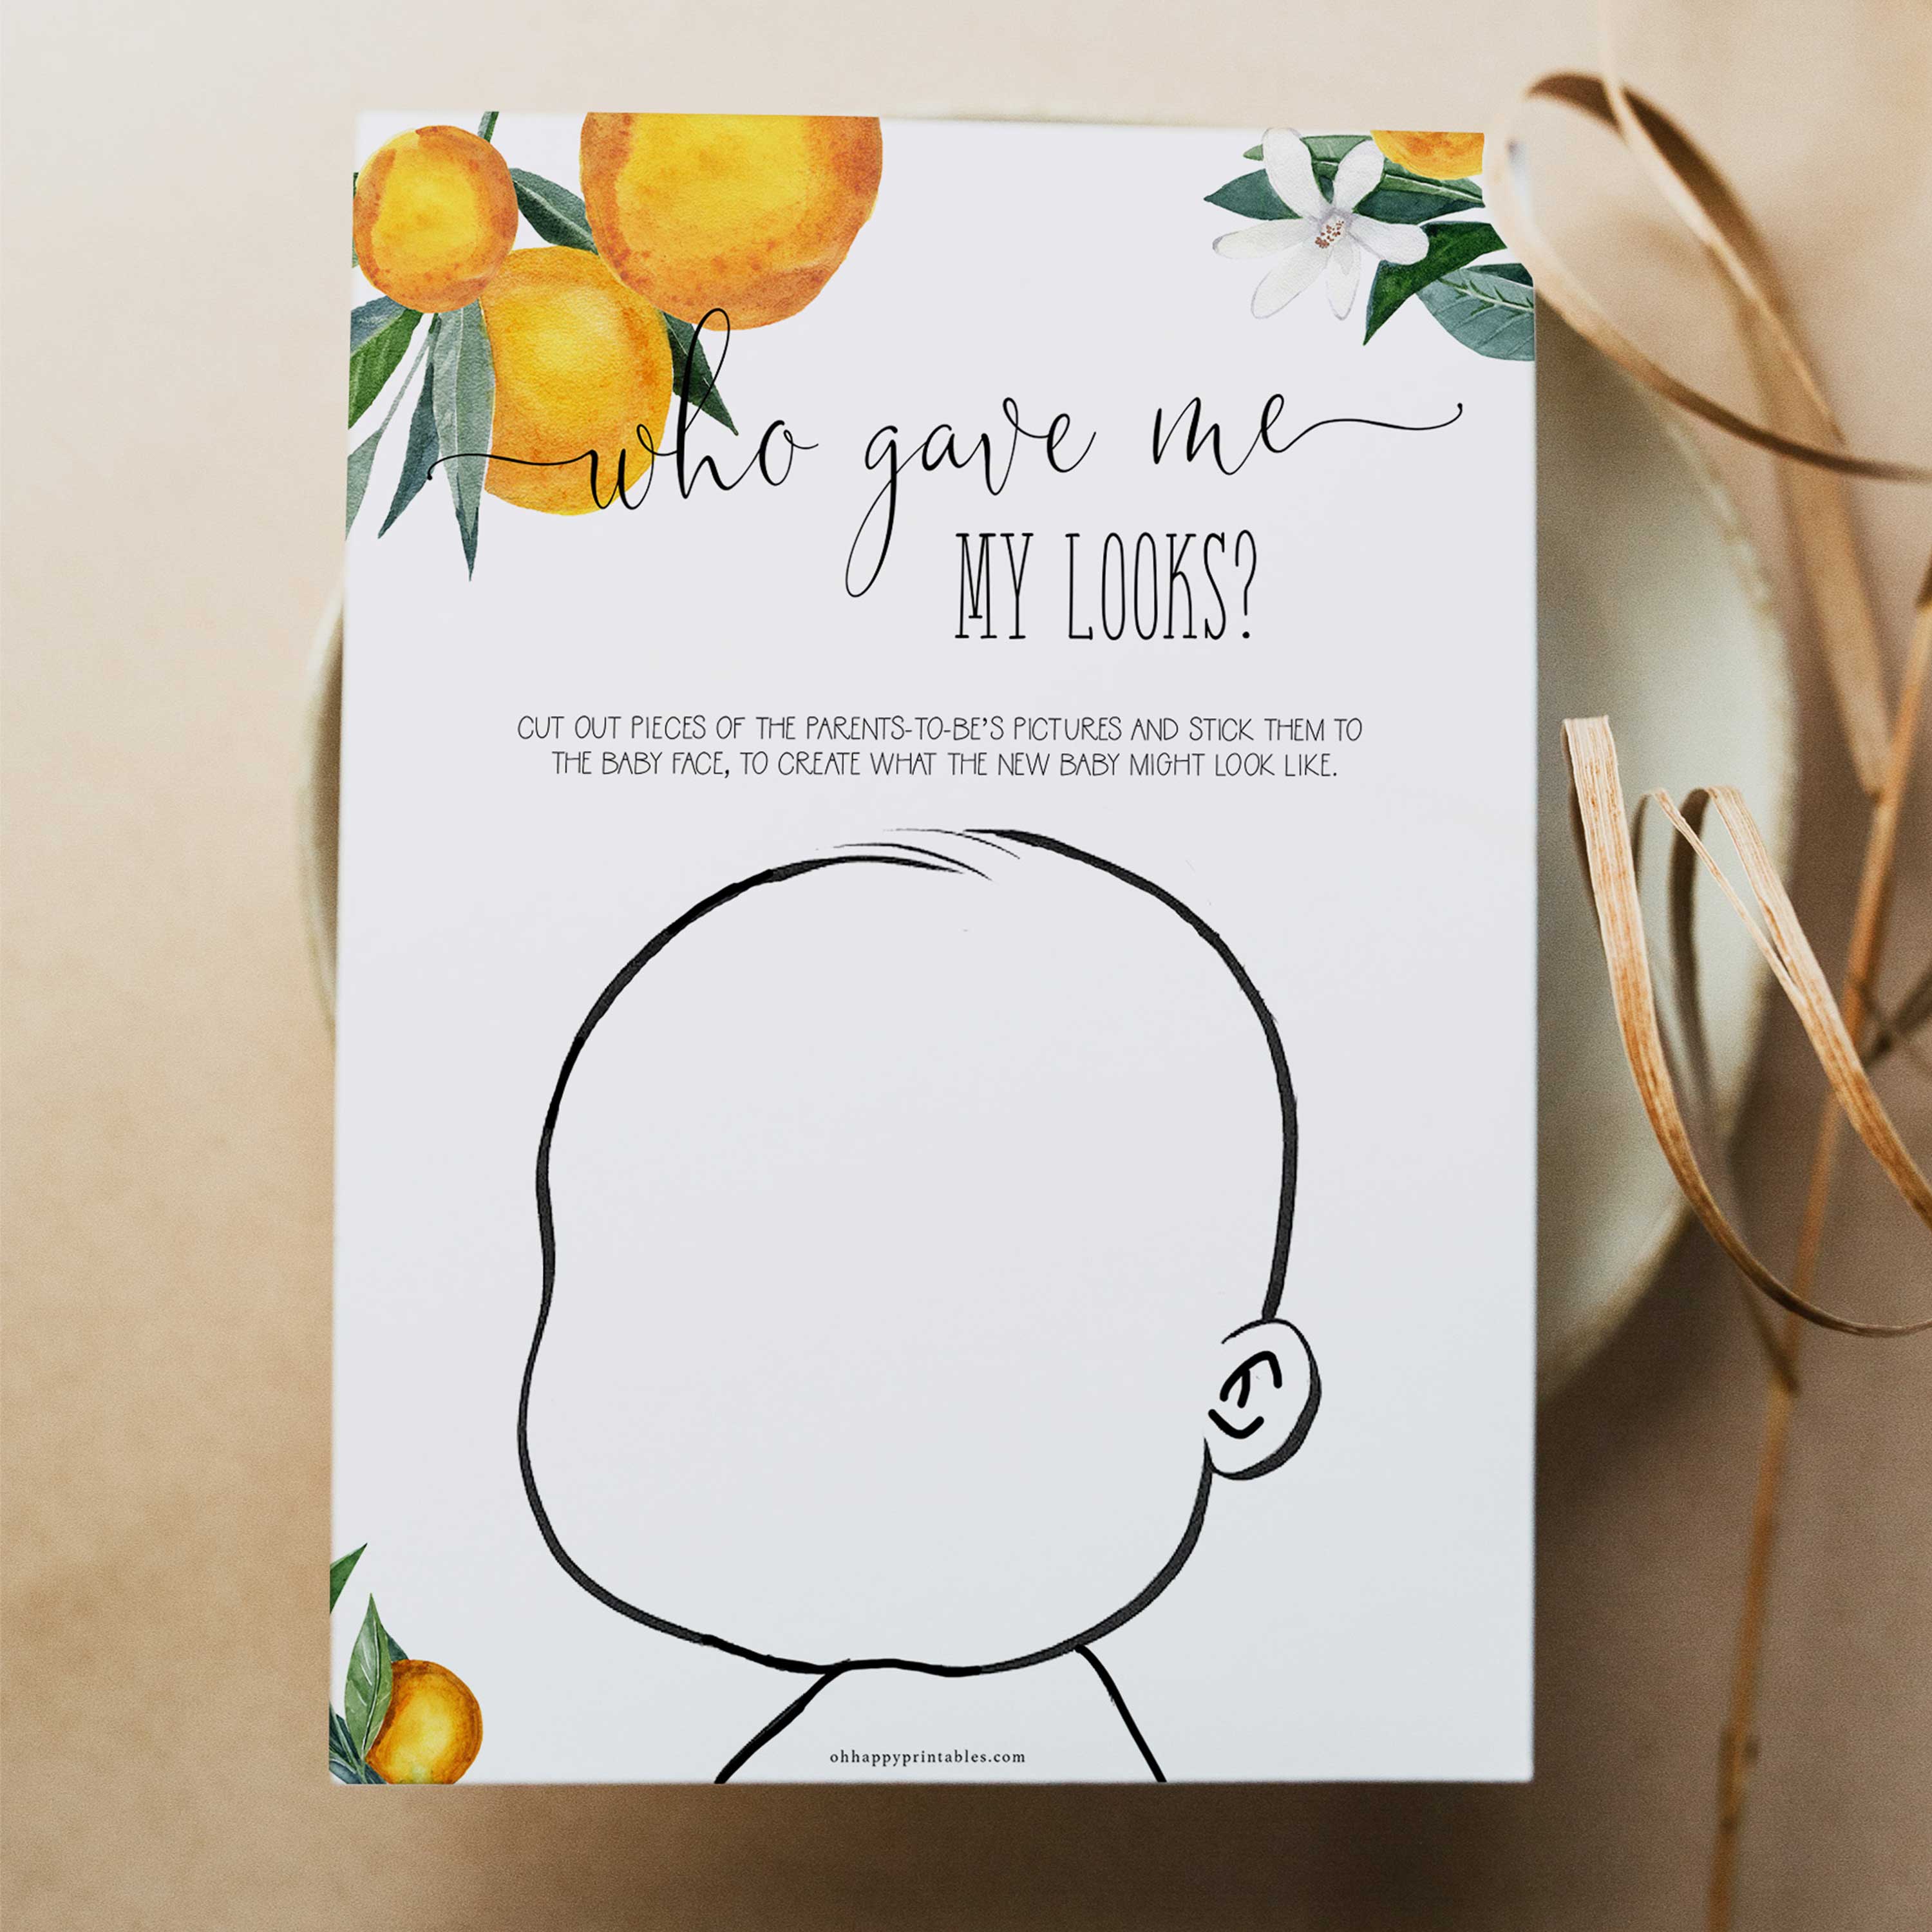 who am i baby shower game, Printable baby shower games, little cutie baby games, baby shower games, fun baby shower ideas, top baby shower ideas, little cutie baby shower, baby shower games, fun little cutie baby shower ideas, citrus baby shower games, citrus baby shower, orange baby shower